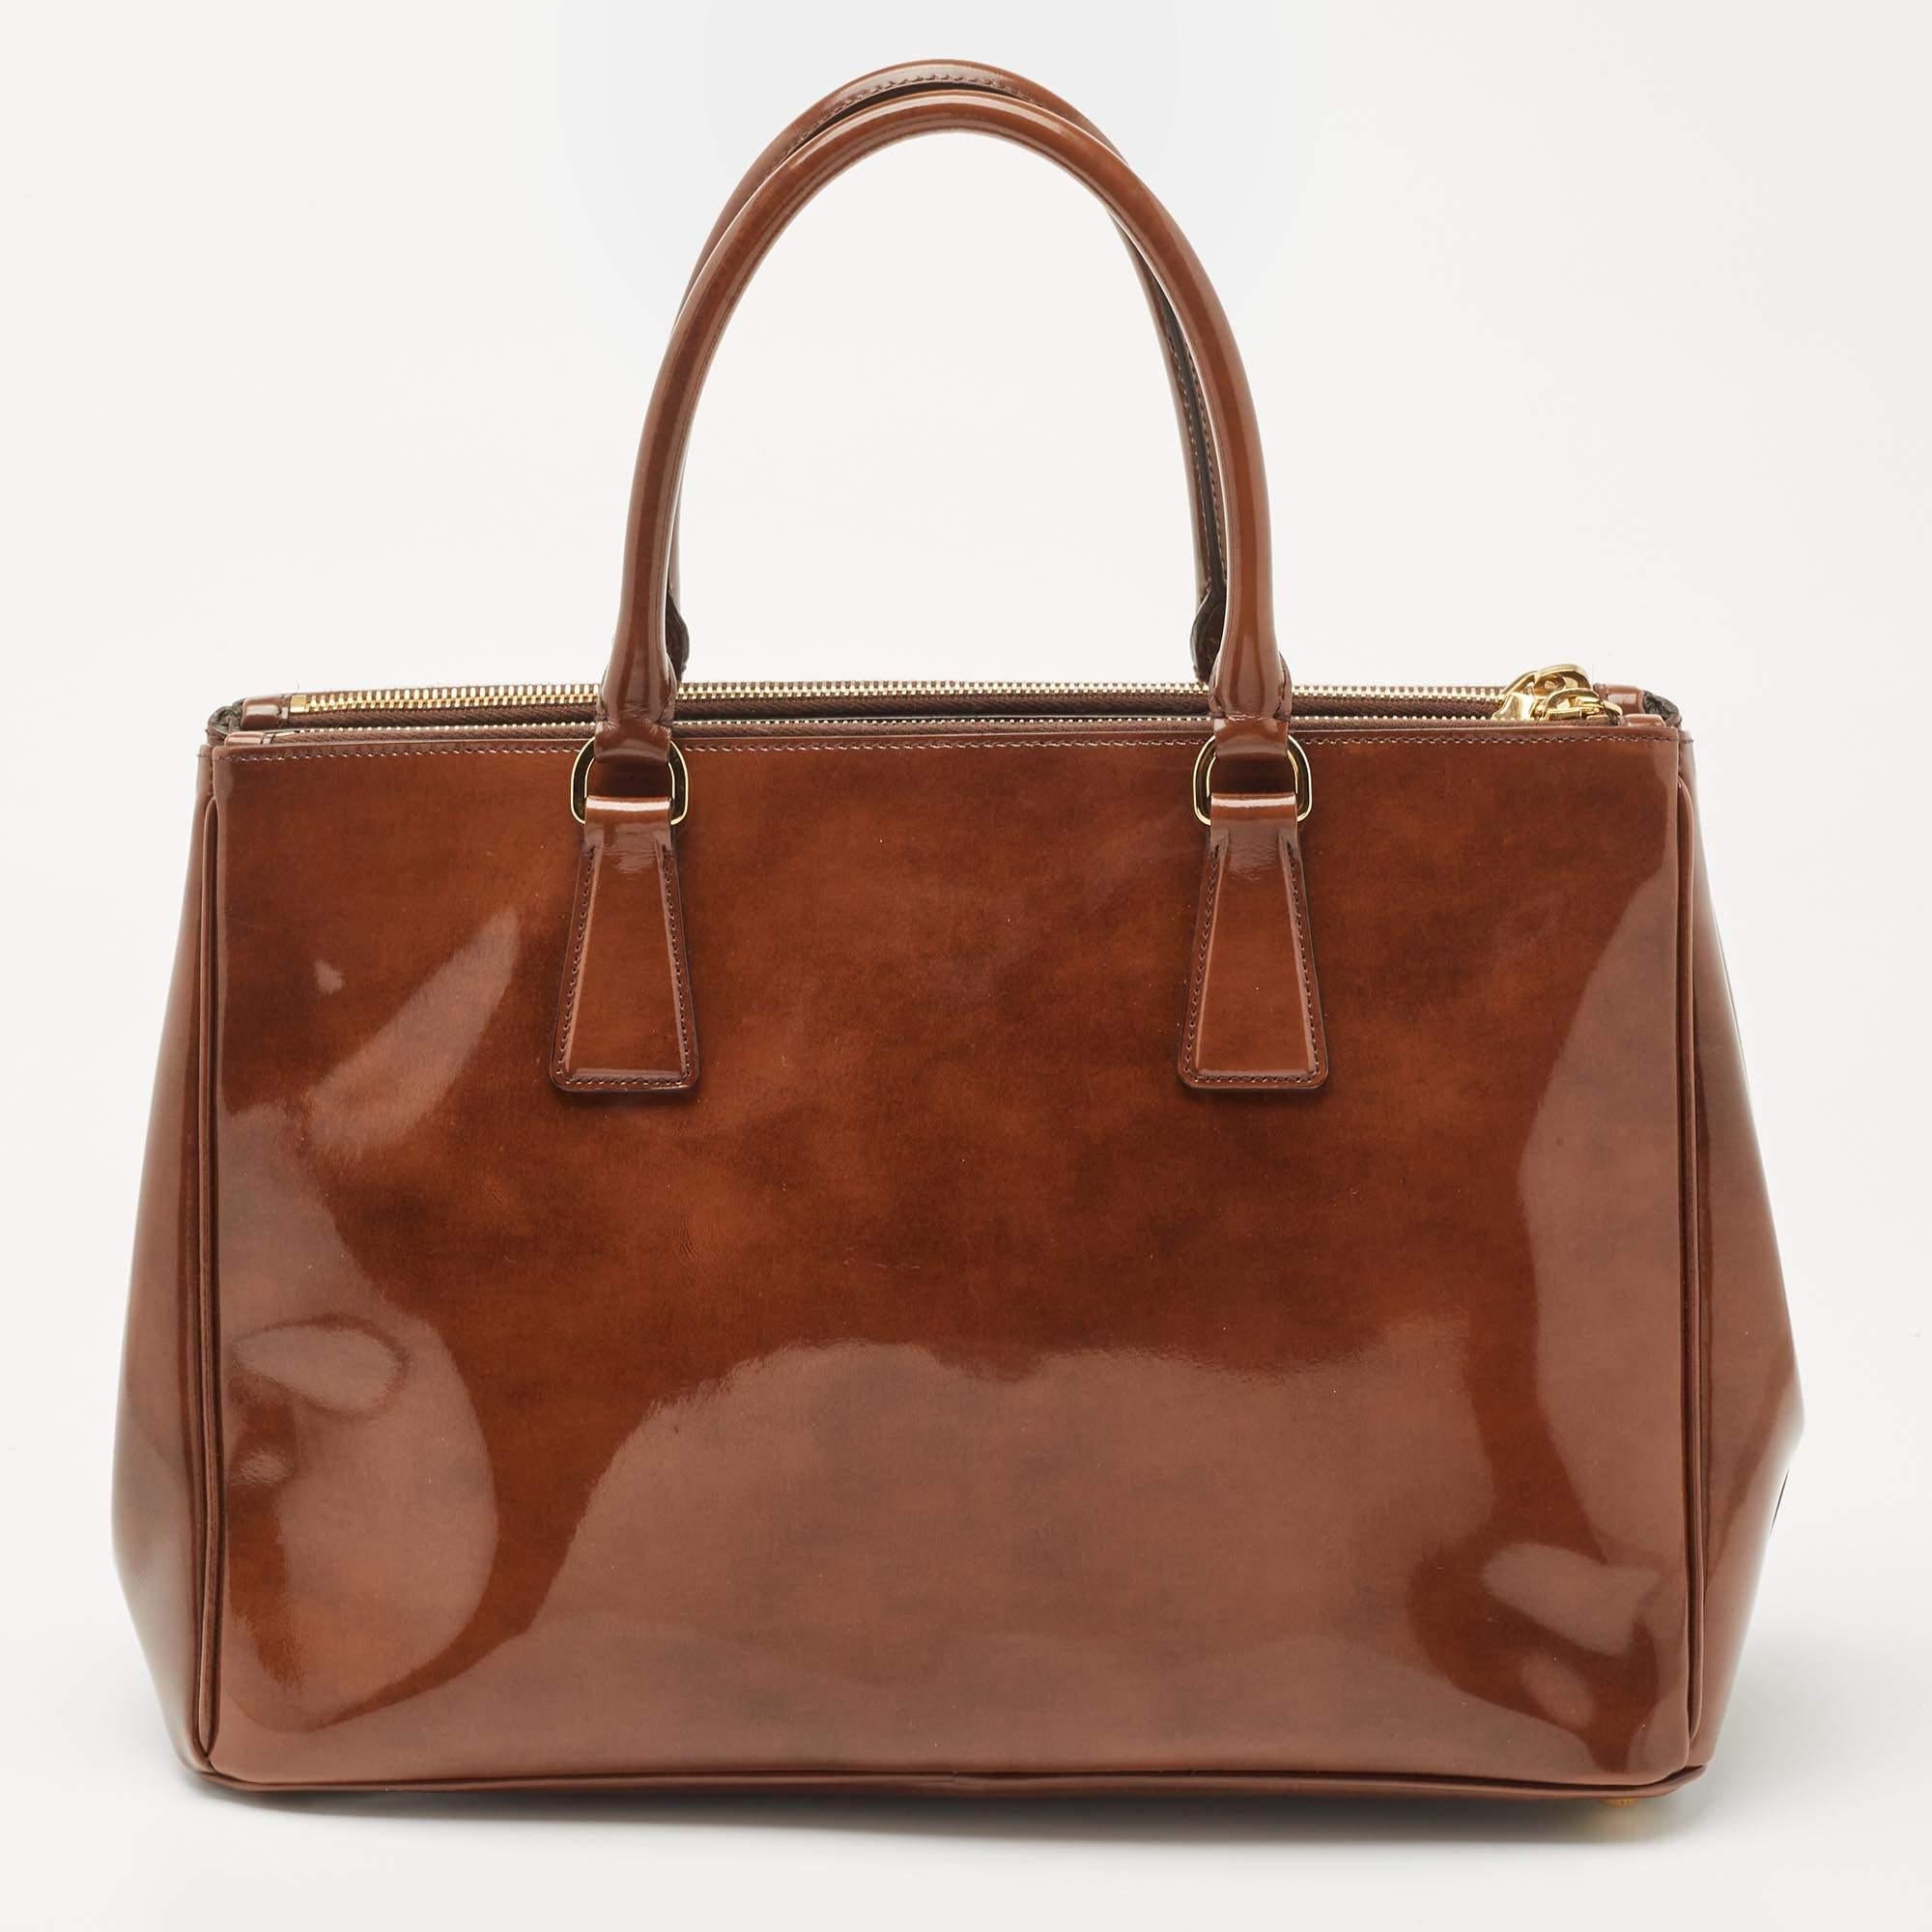 Feminine in shape and grand in design, this Double Zip tote by Prada will be a valuable addition to your closet. It has been crafted from patent leather and styled minimally with gold-tone hardware. It comes with dual handles at the top, two zip